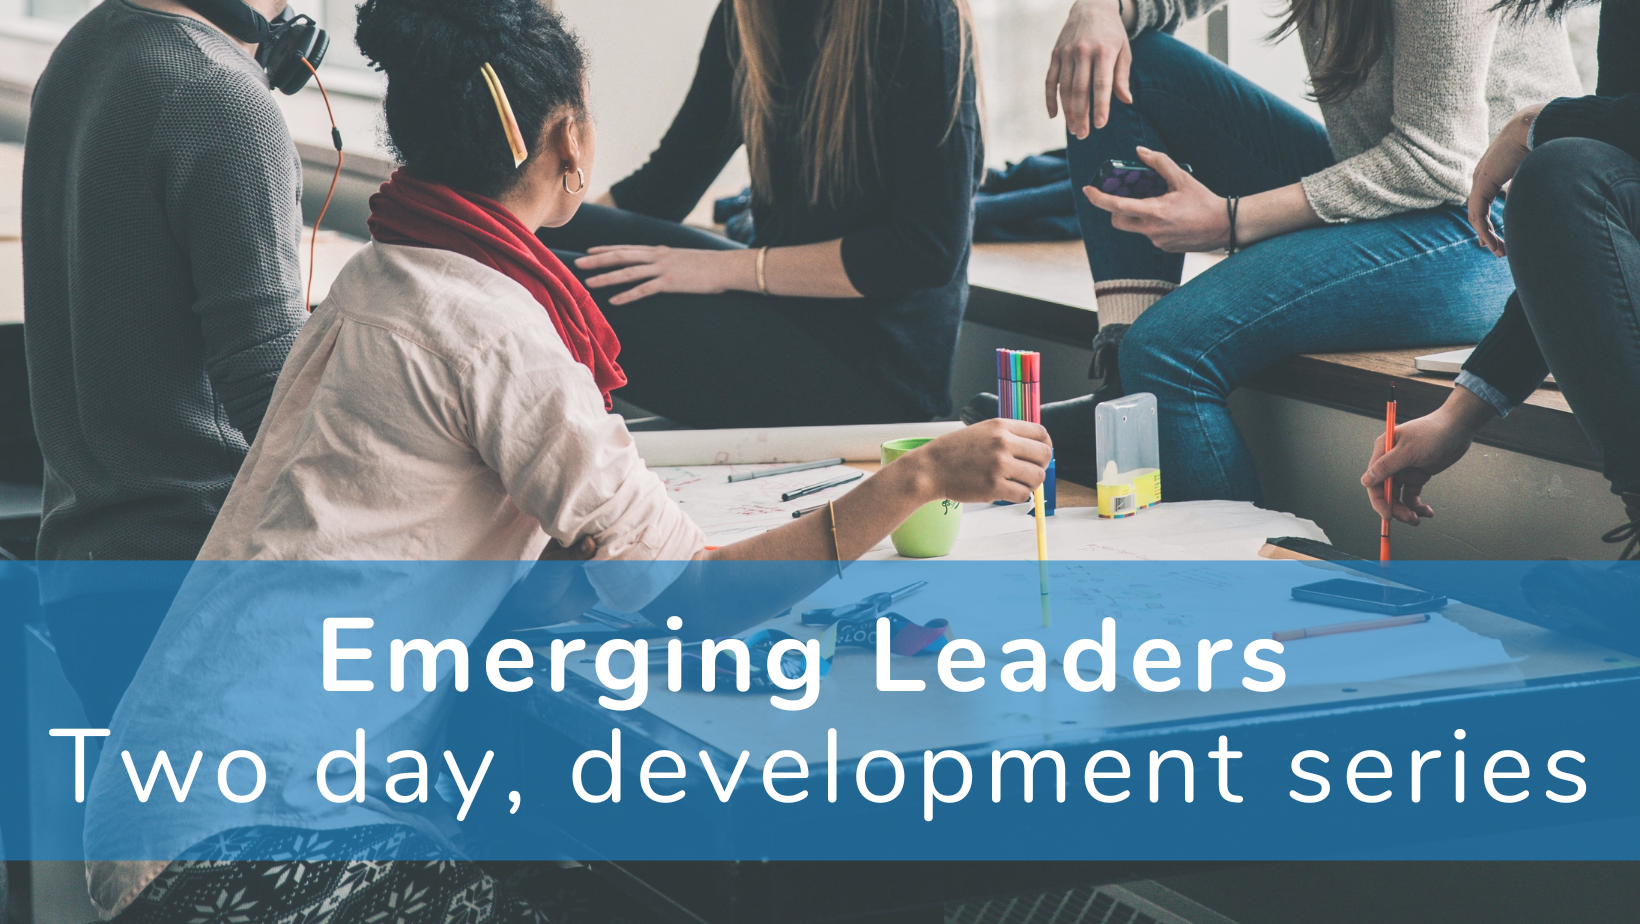 'Emerging leaders - two day development series'